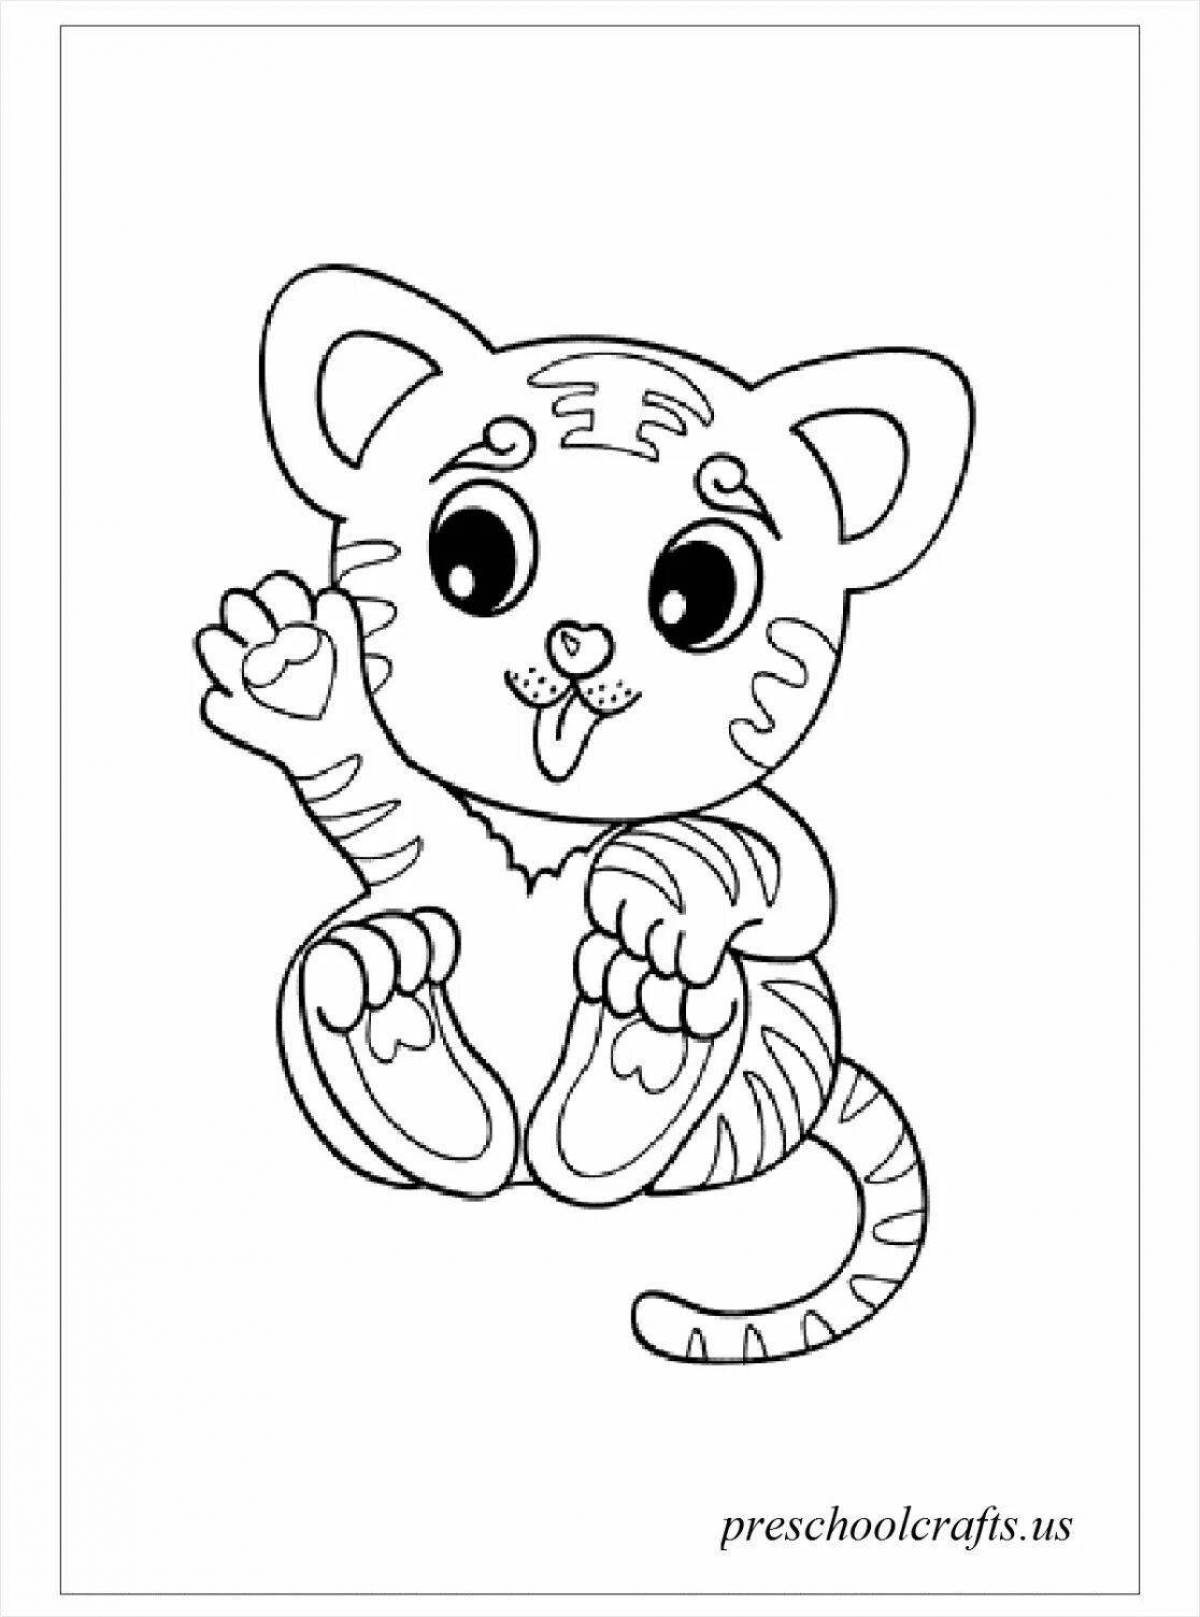 Sweet animal coloring pages